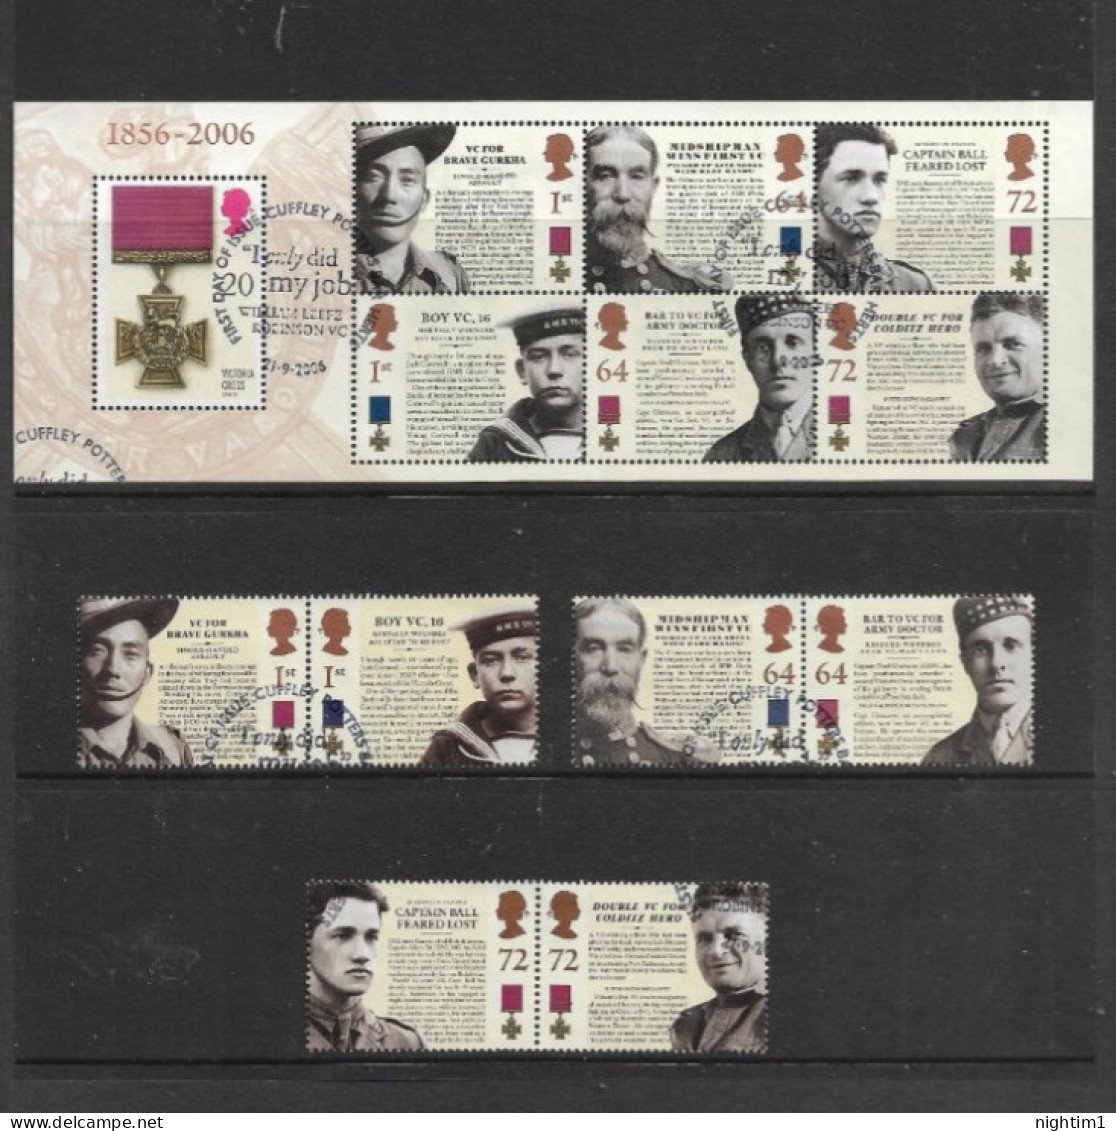 GREAT BRITAIN COLLECTION. VICTORIA CROSS SET OF 6 AND SOUVENIR SHEET. USED. - Used Stamps